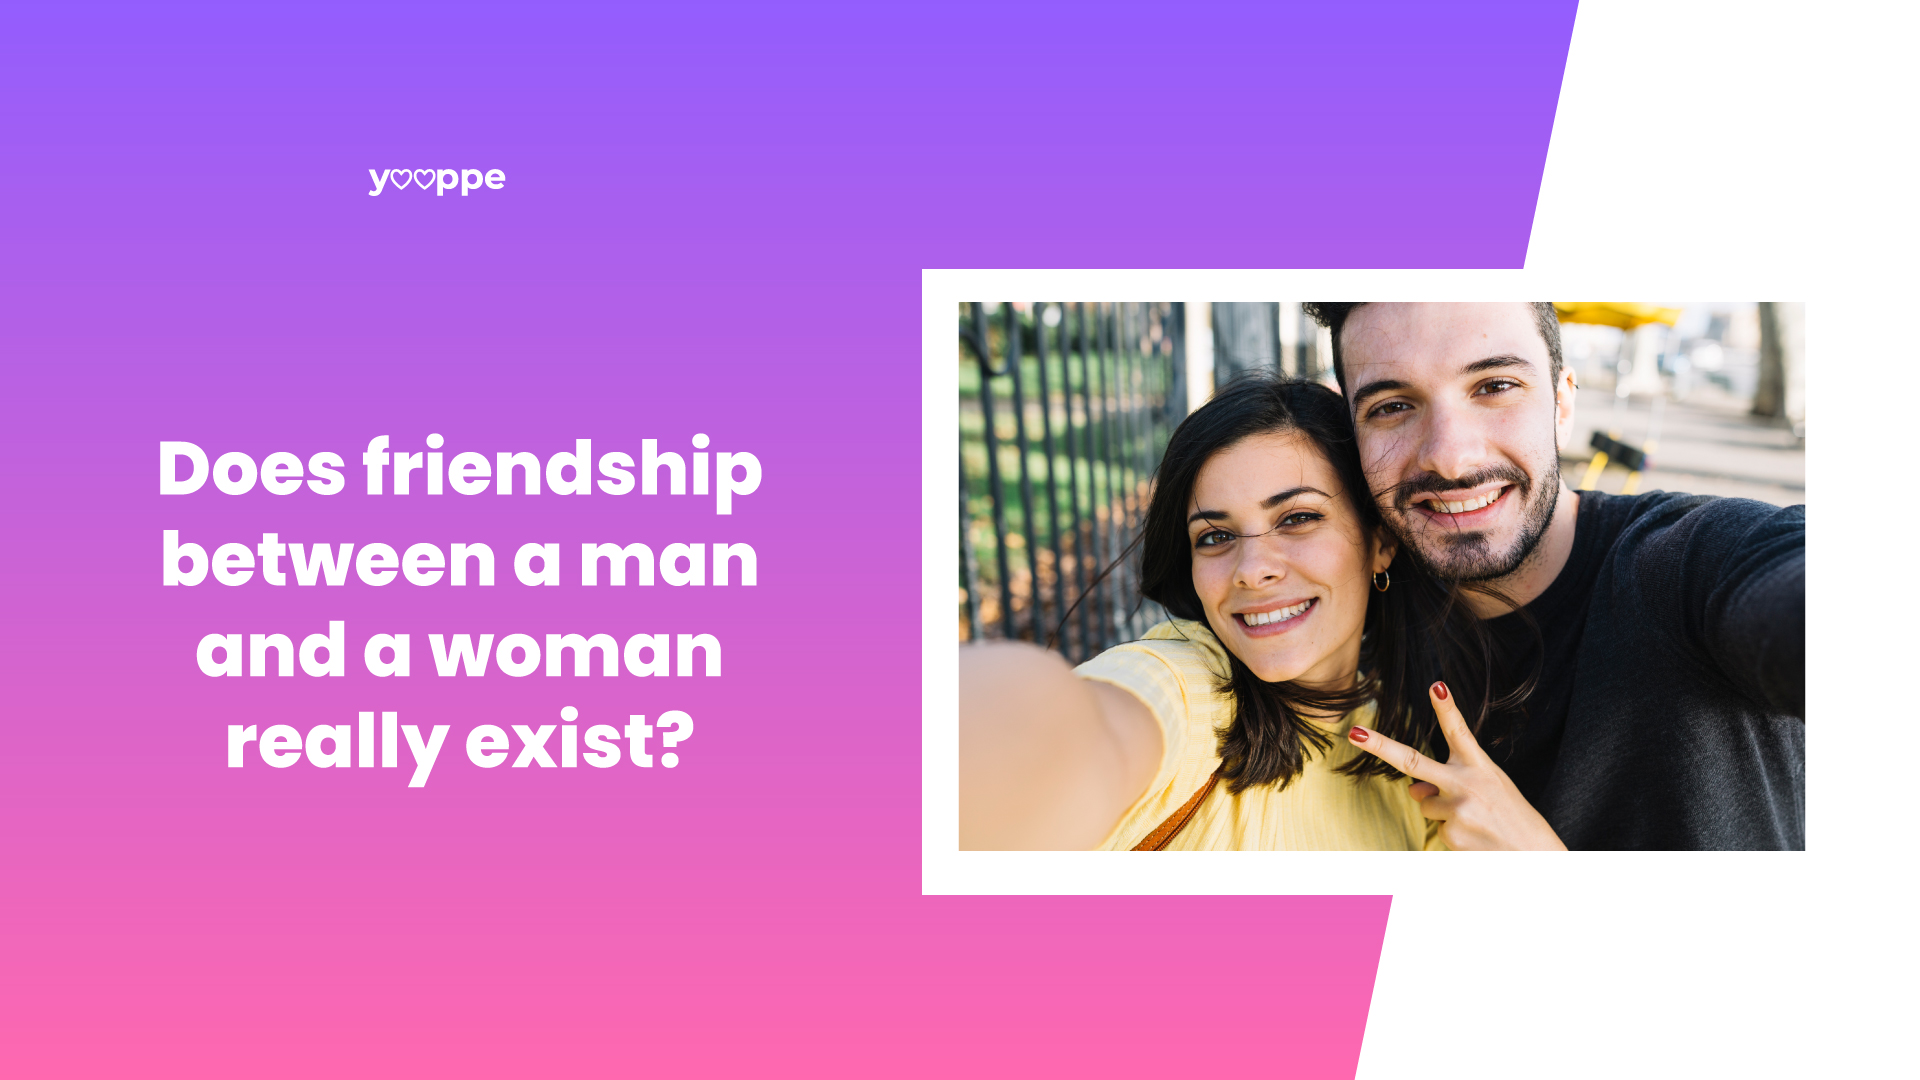 friendship-between-men-and-women-in-a-photo